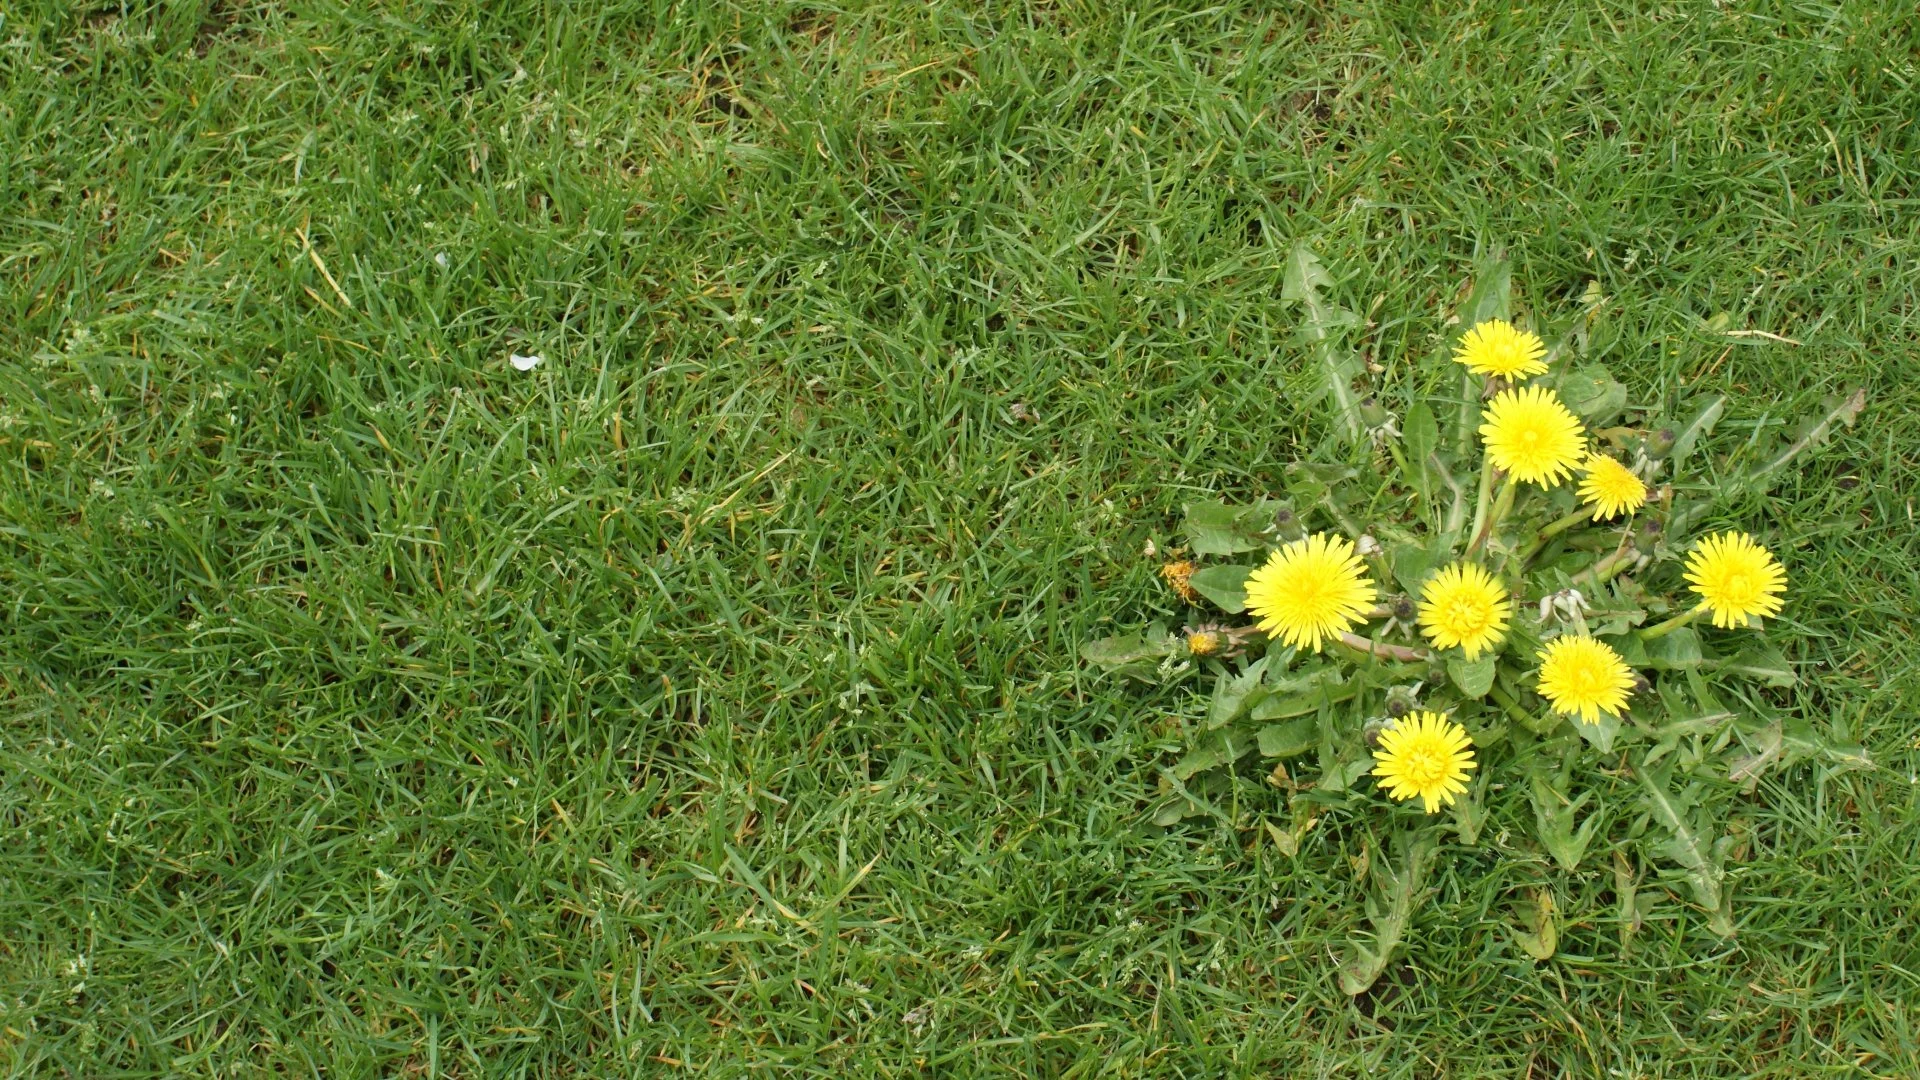 Are Pre-Emergent Weed Control Treatments Necessary in the Spring?